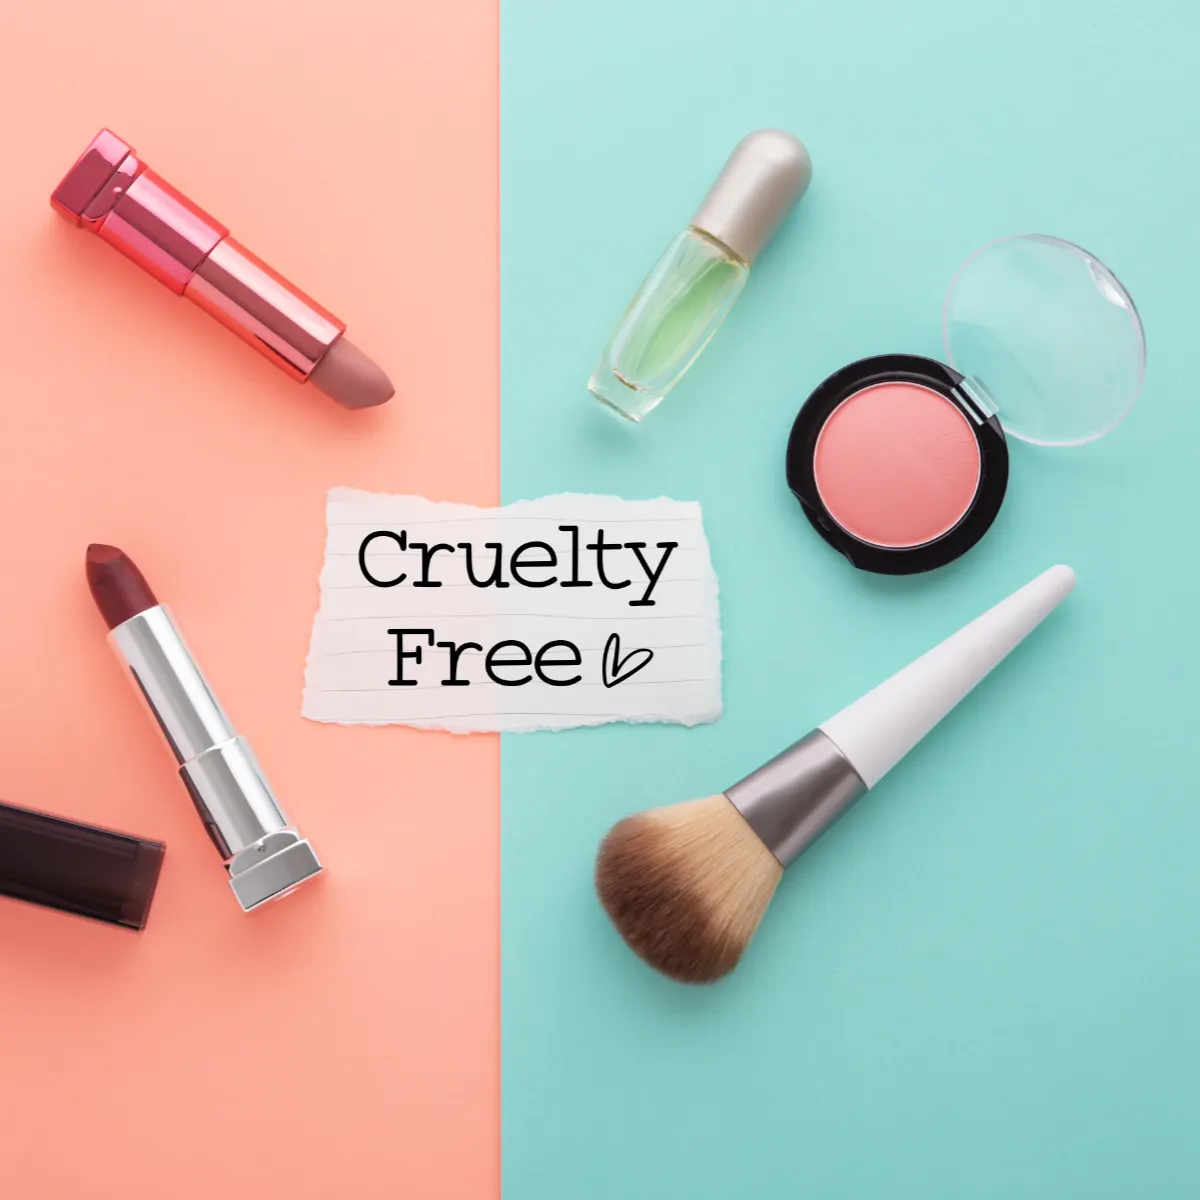 Find out why cruelty-free makeup is so important